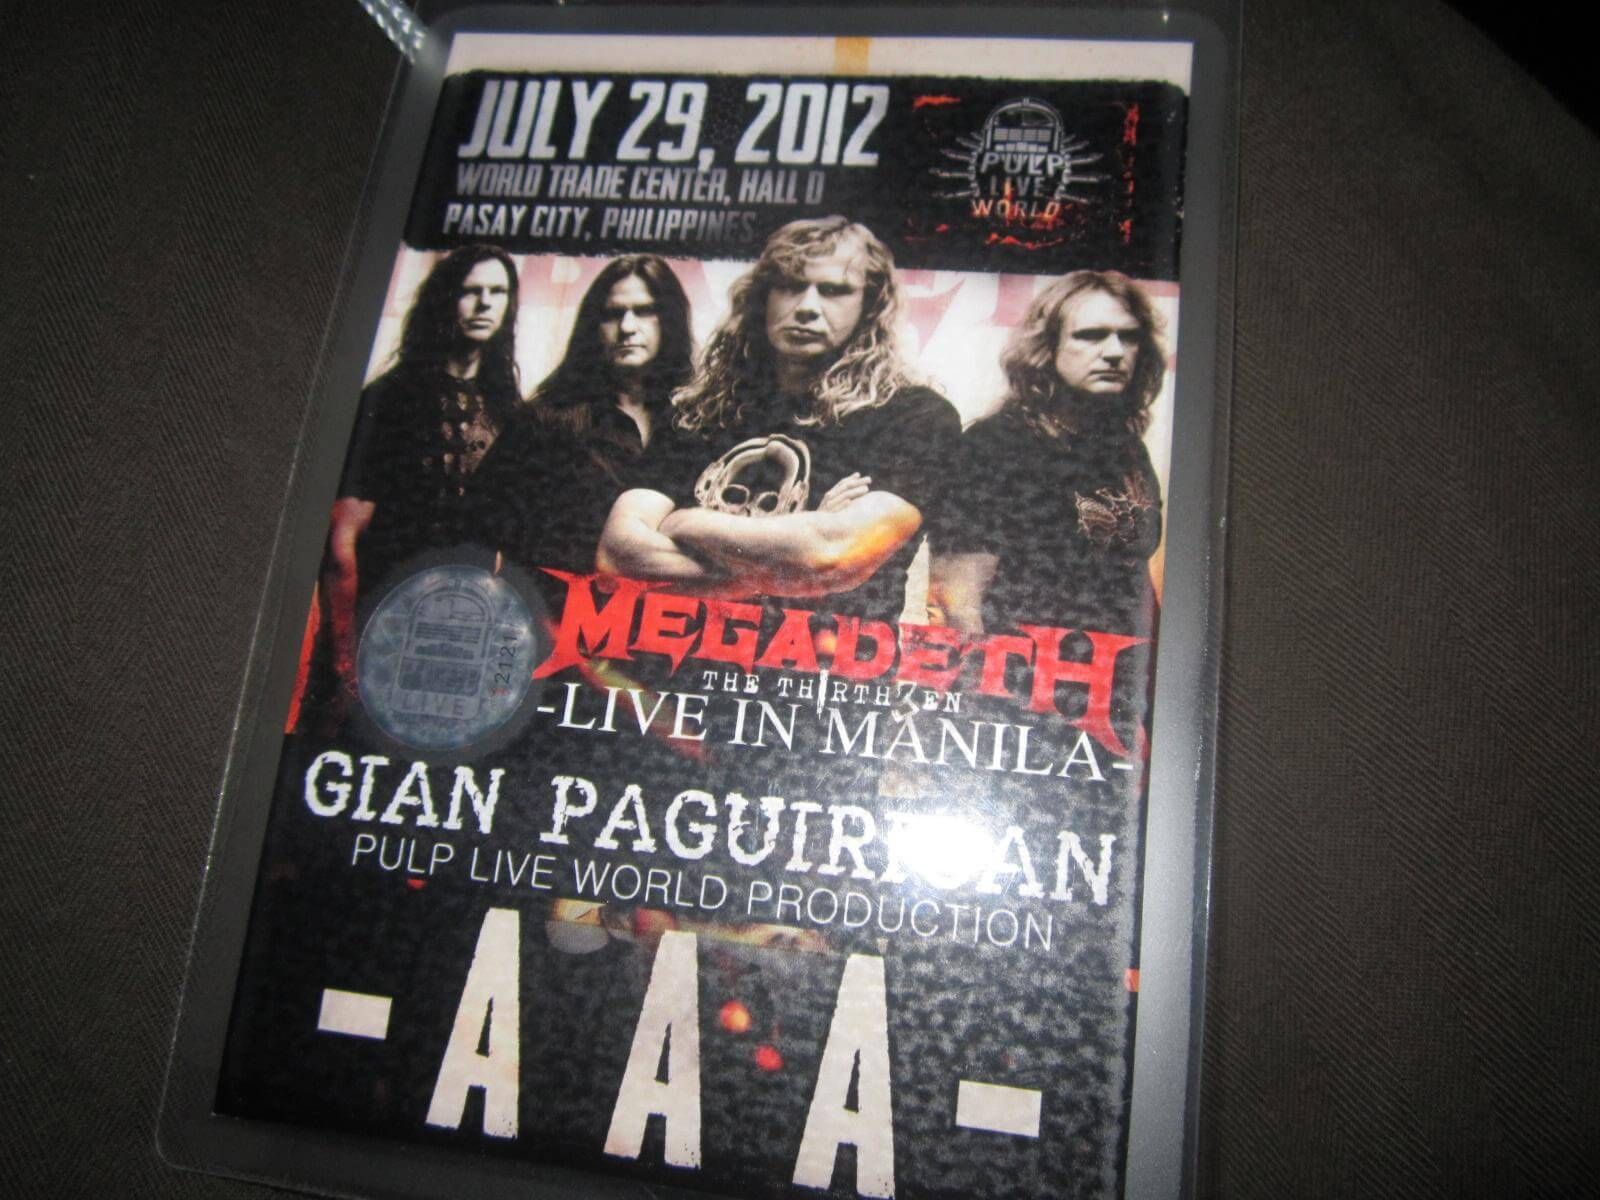 Megadeth Live in Manila - All Access Areas